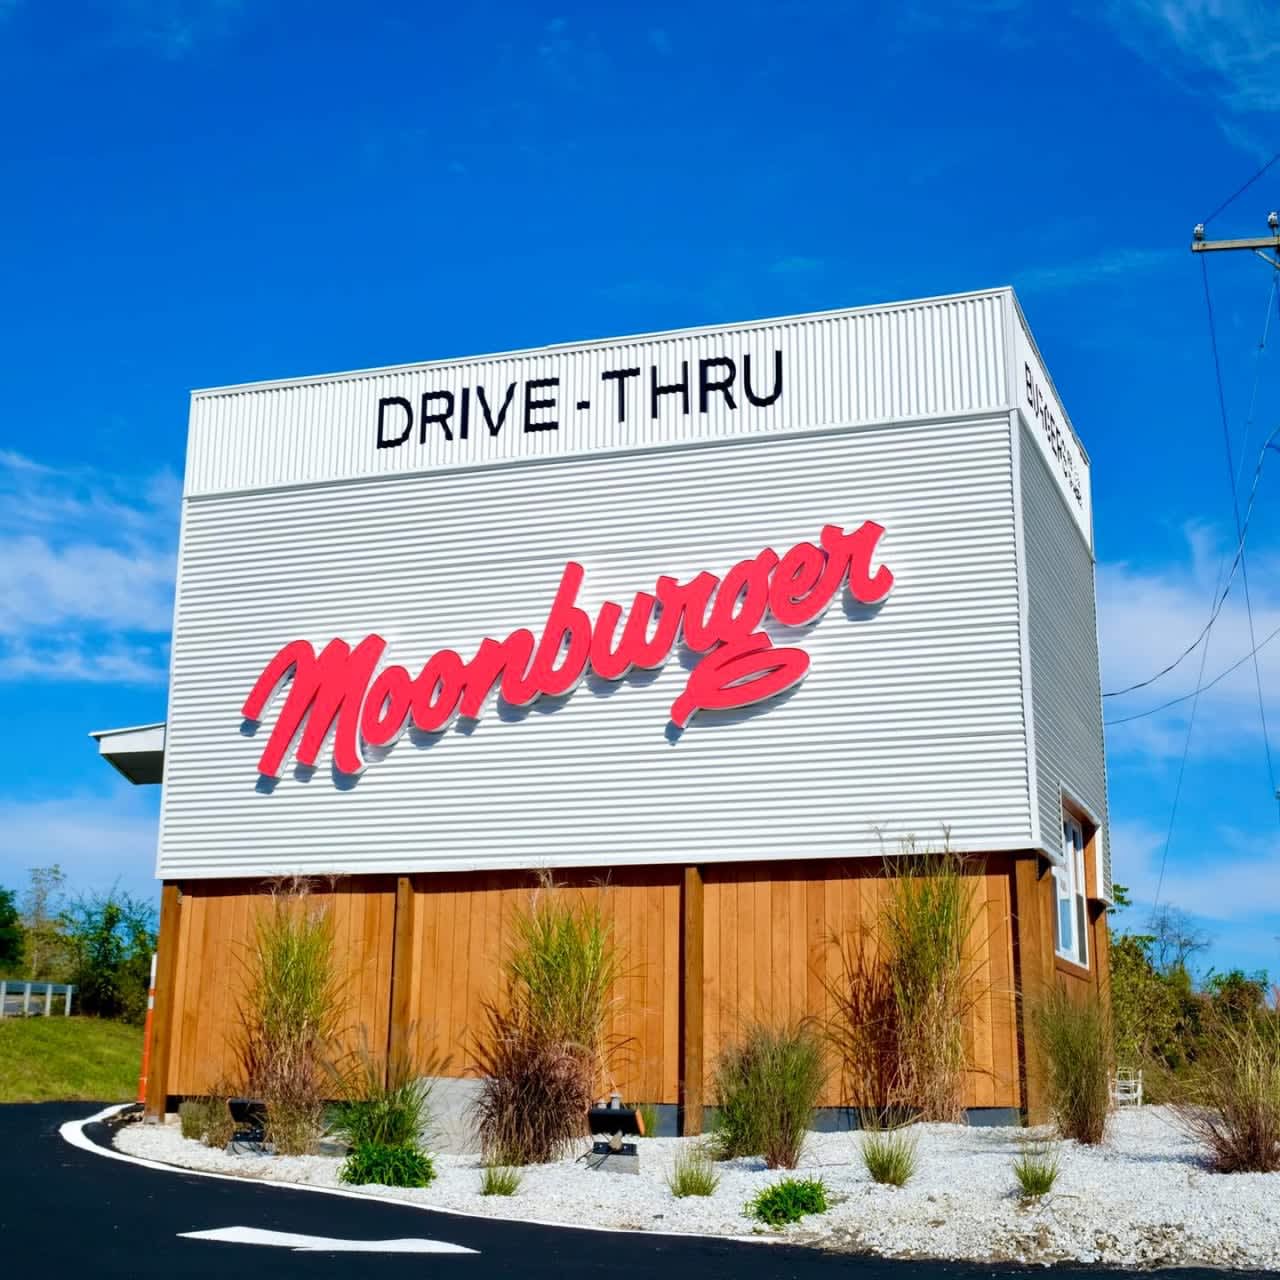 Moonburger is located at 5 Powells Lane in Kingston.